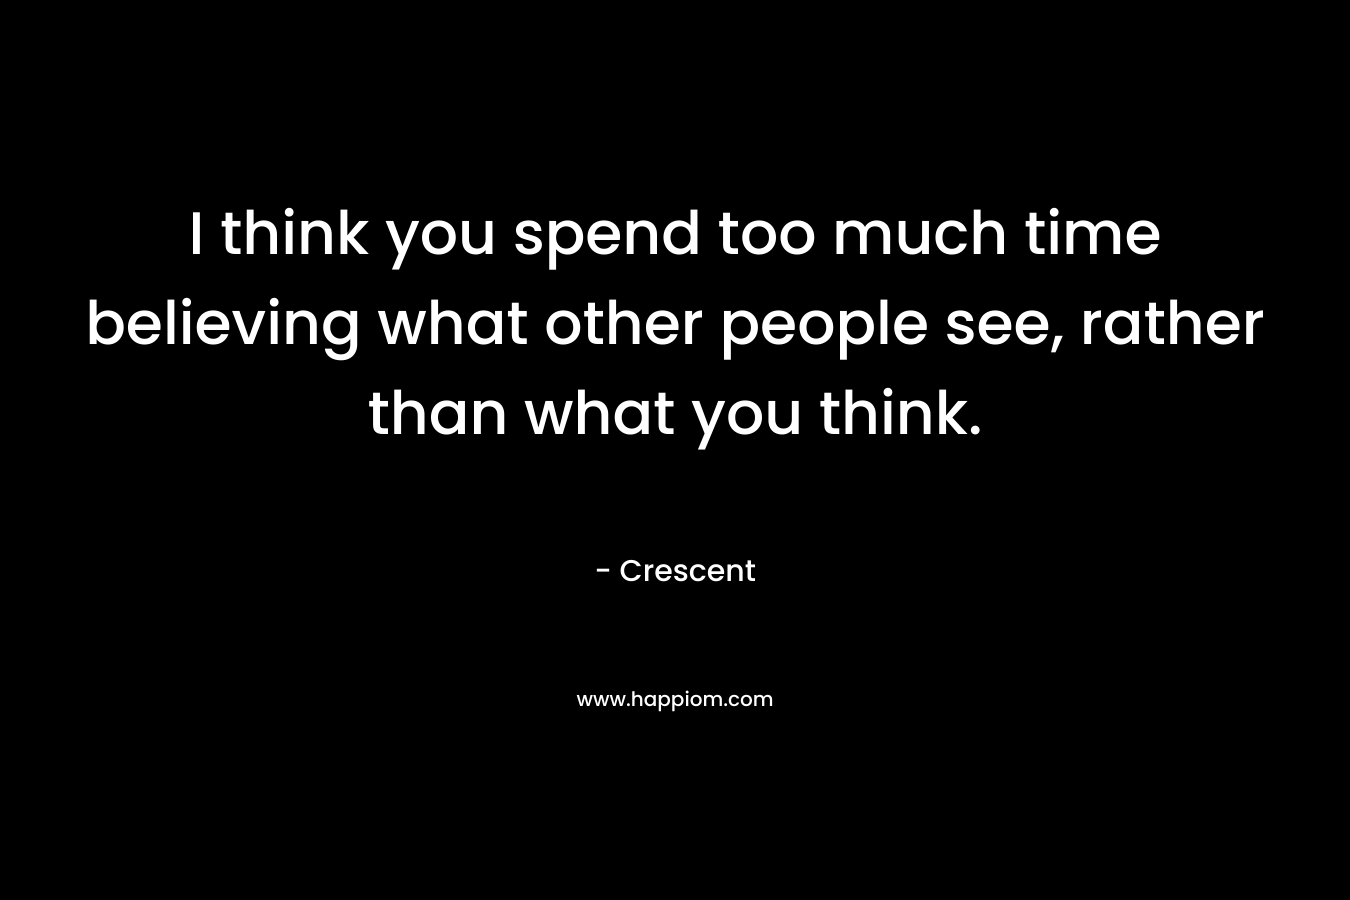 I think you spend too much time believing what other people see, rather than what you think. – Crescent